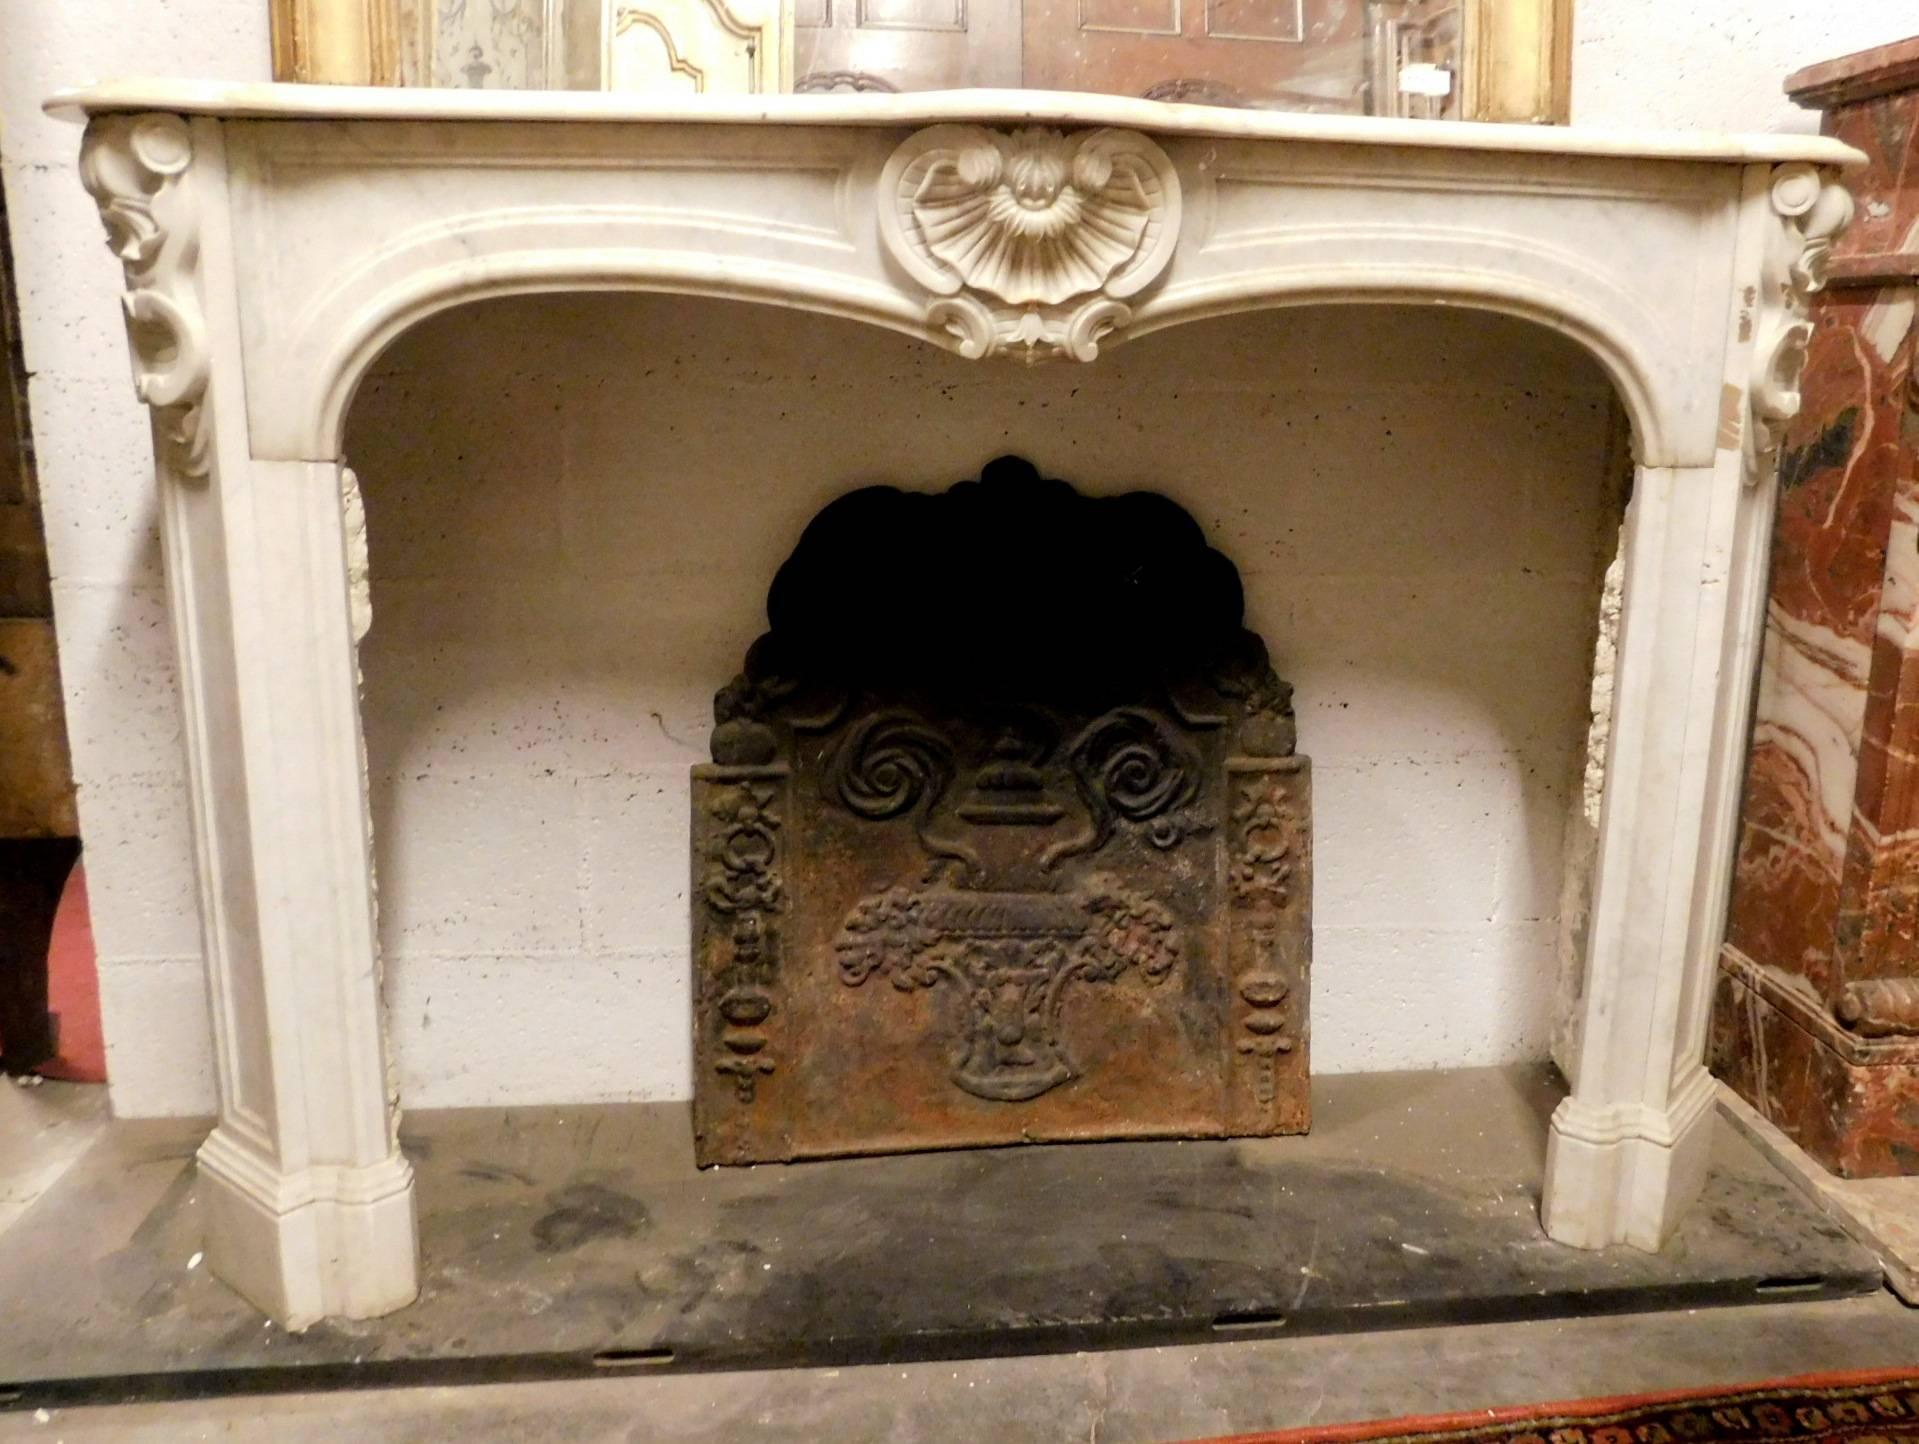 Late 18th Century Antique Fireplace Mantel Made of Carrara's Marble